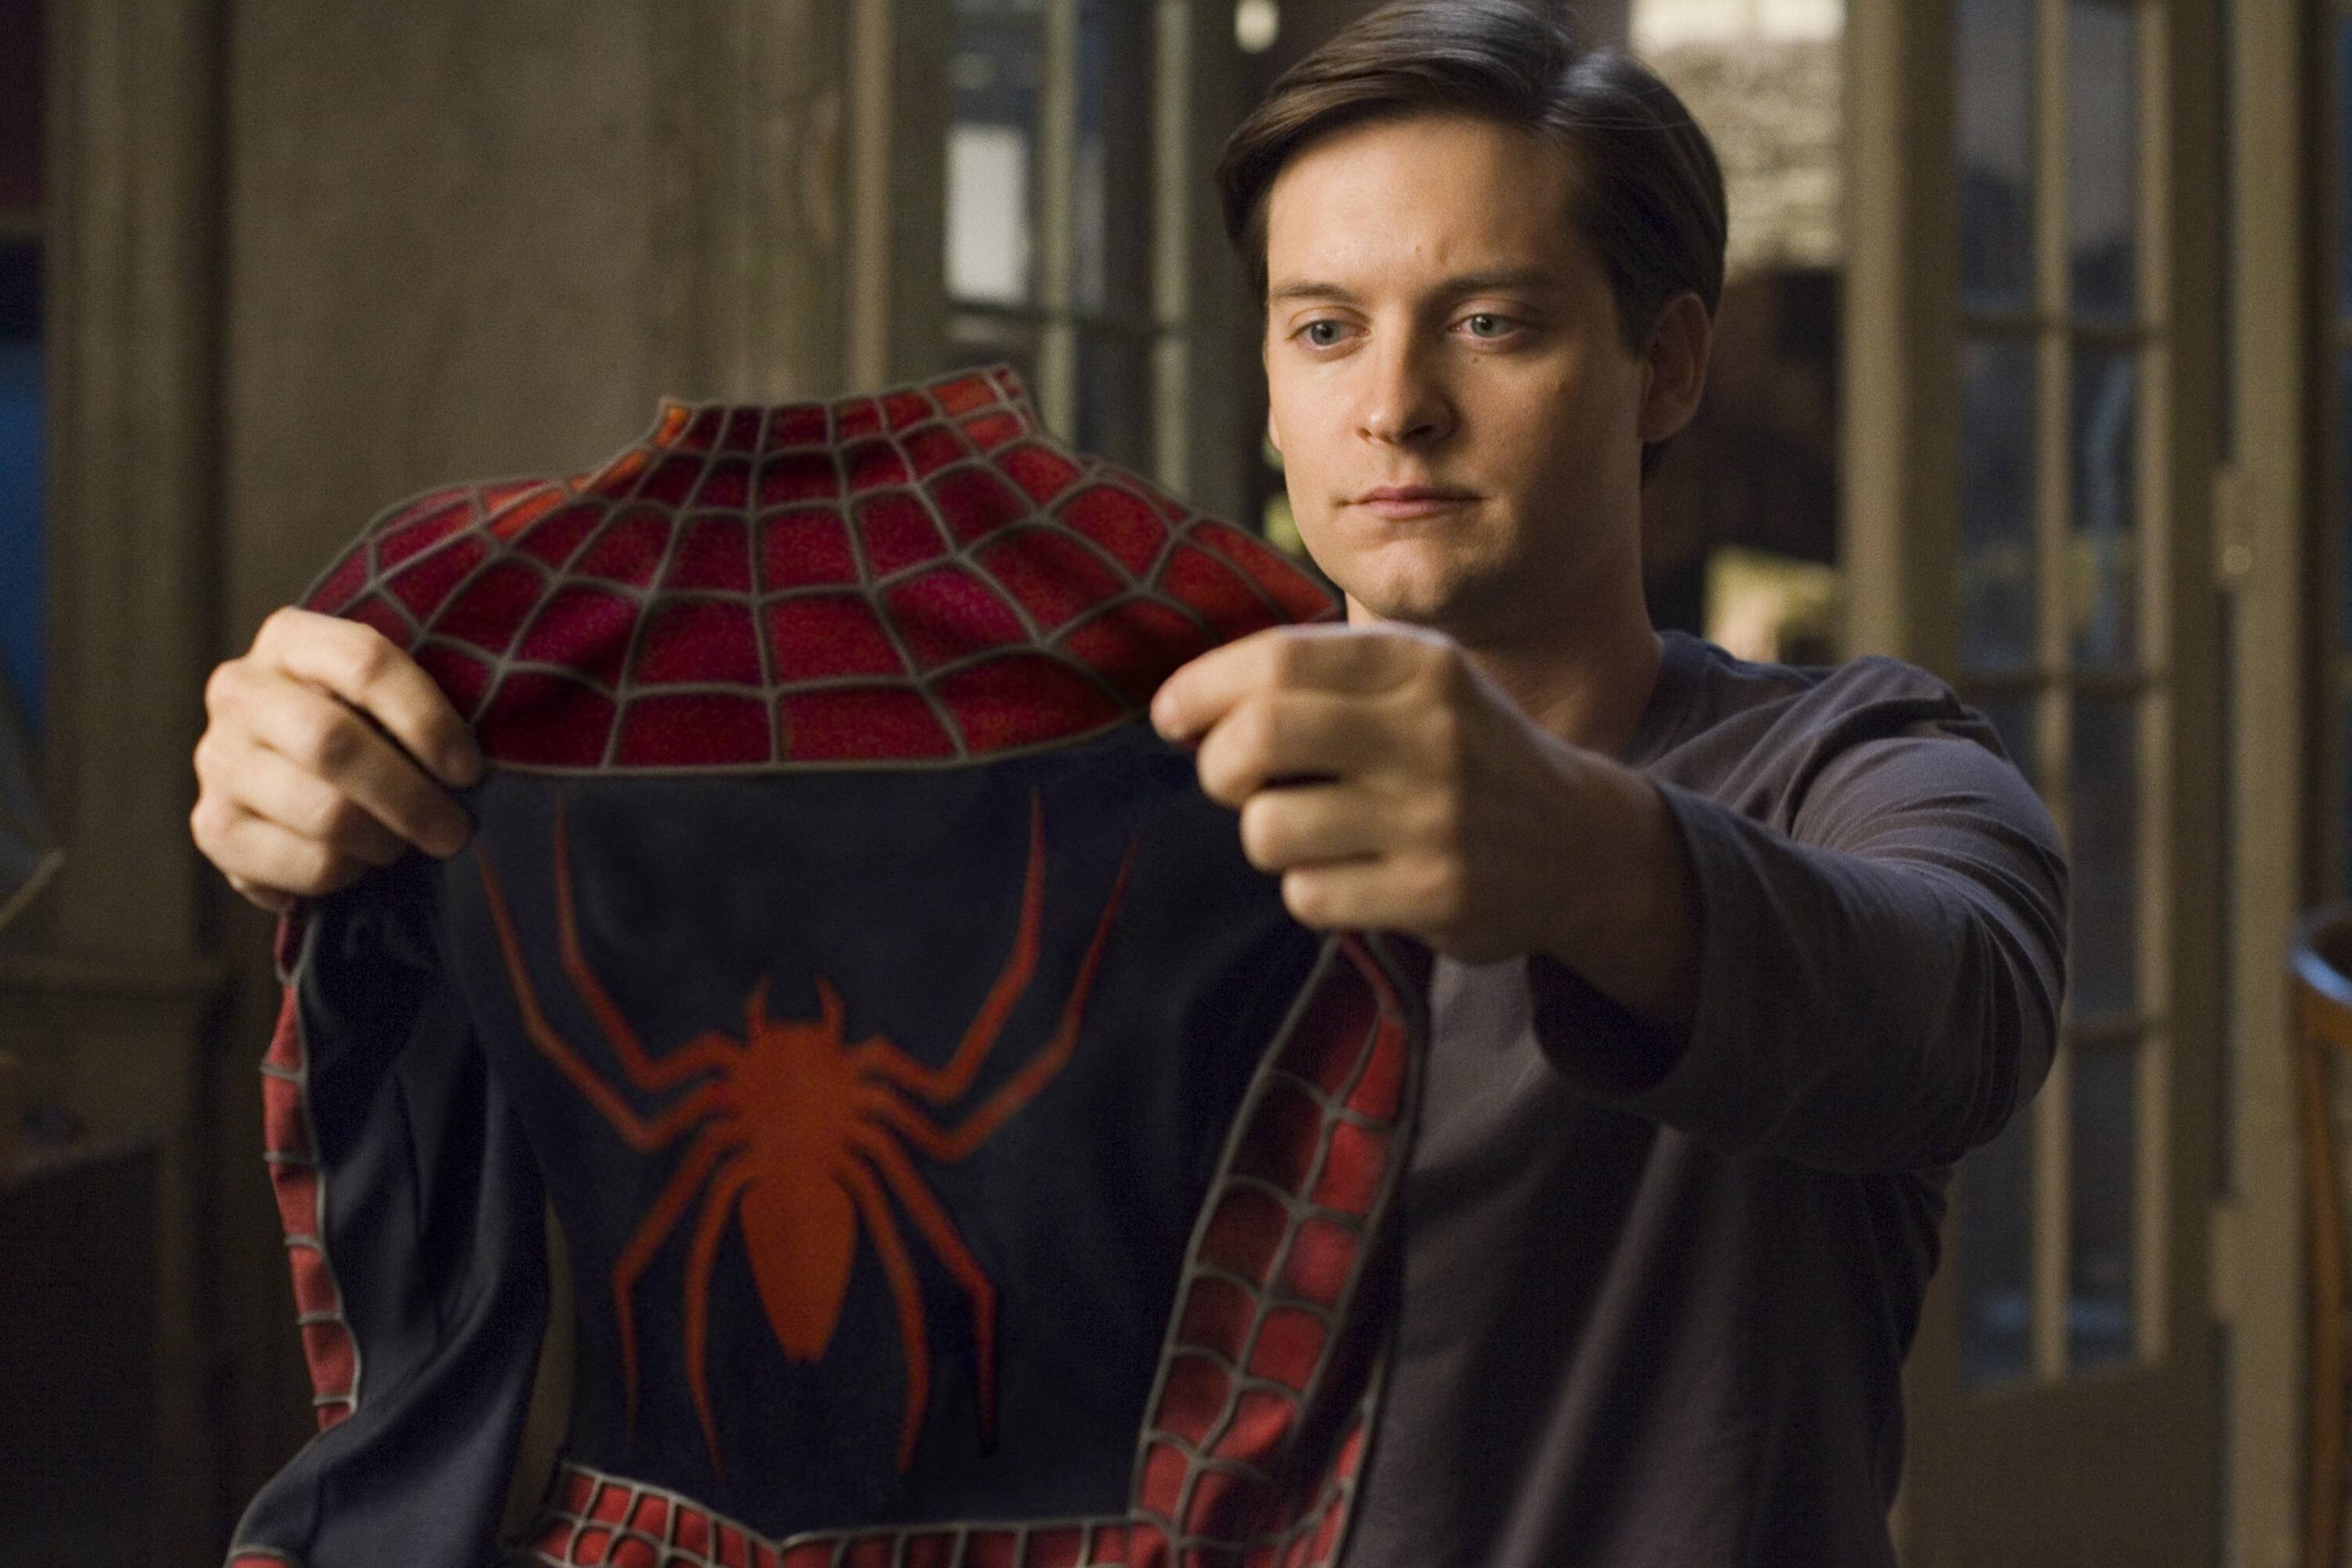 Spider-Man, Tobey Maguire, Iconic actor, Peter Parker portrayal, 3000x2000 HD Desktop